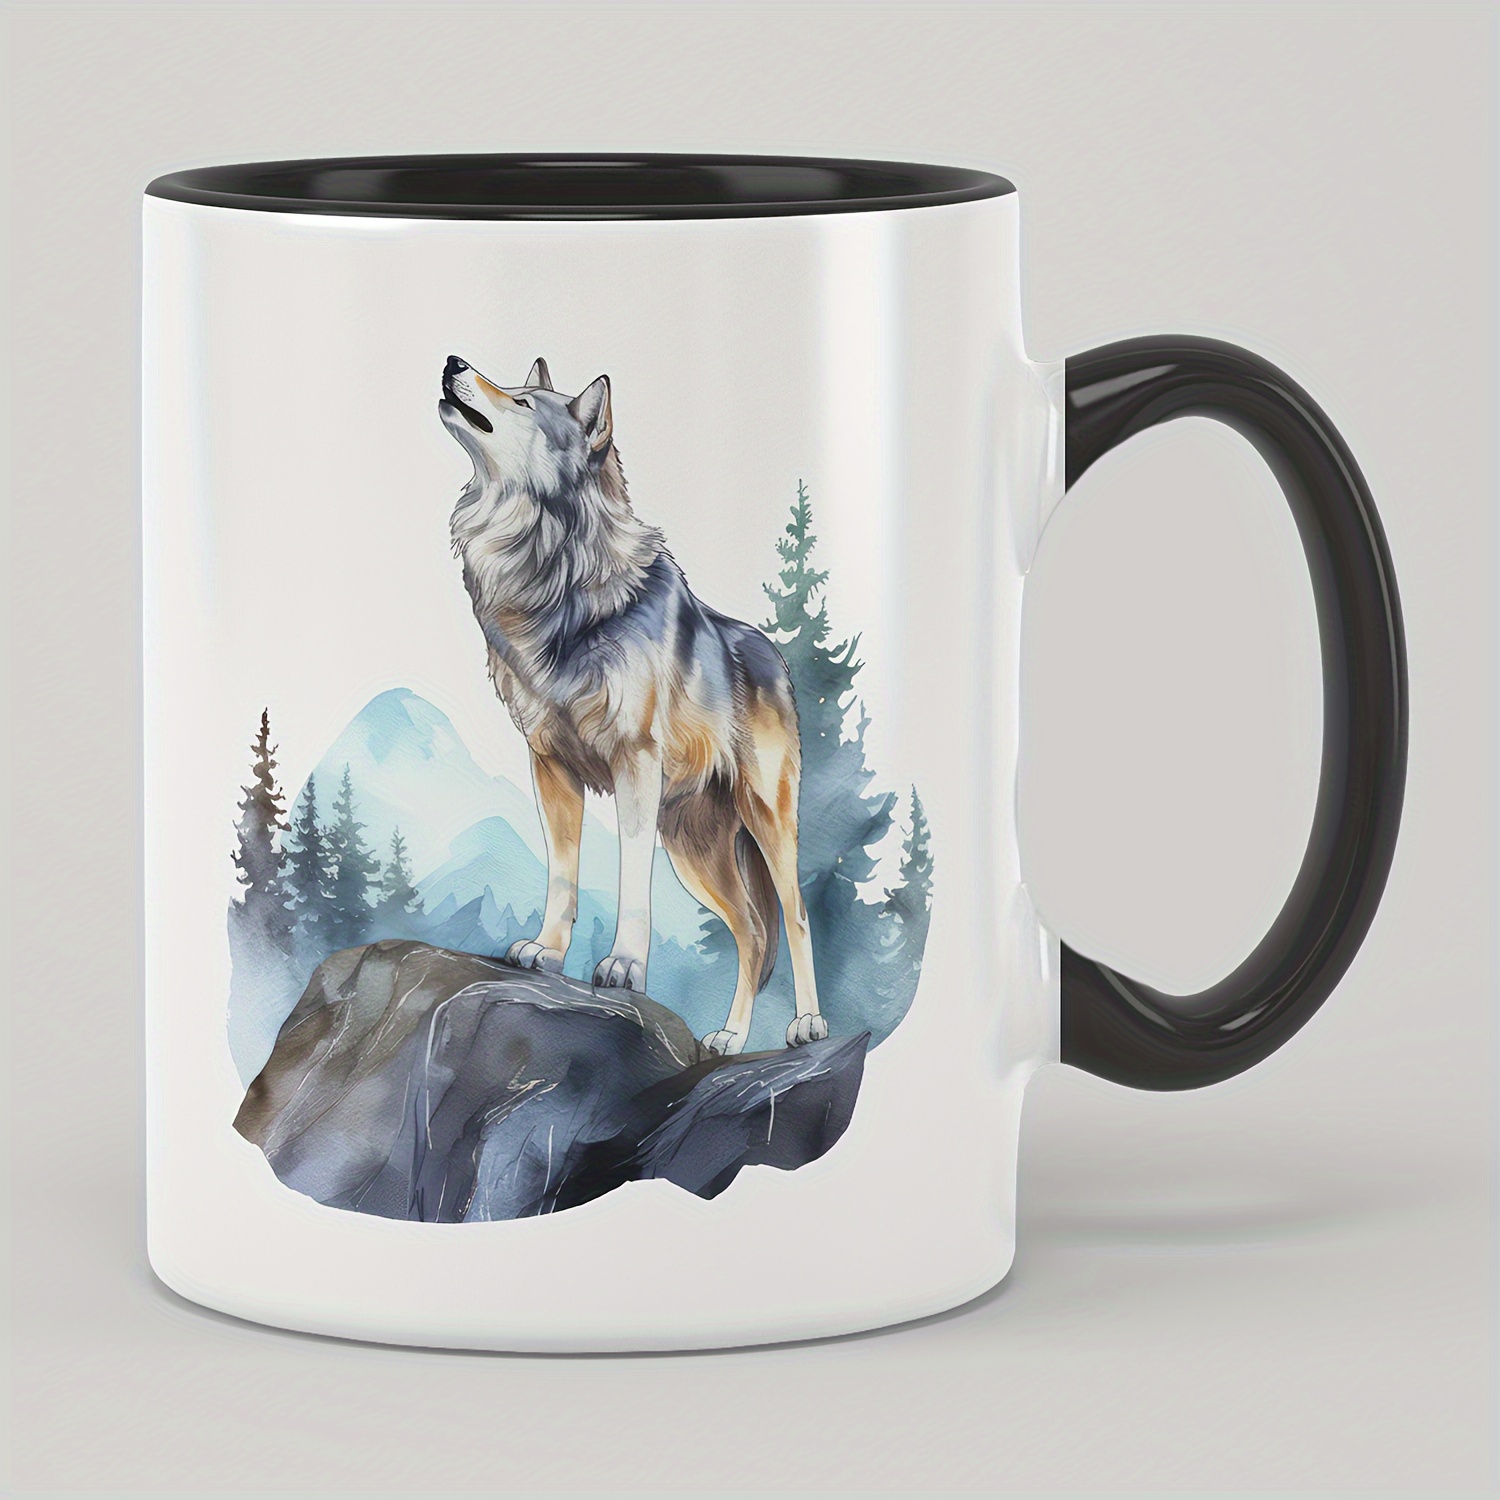 

1pc, 11oz, 330ml Creative Gift Whistling Wolf Figure Ceramic Mug, Coffee Mug, Water Cup, Humorous, Funny, Cute Mug, For Friends, For Parents, For Son, For Daughter, Holiday Gift, For Cafe